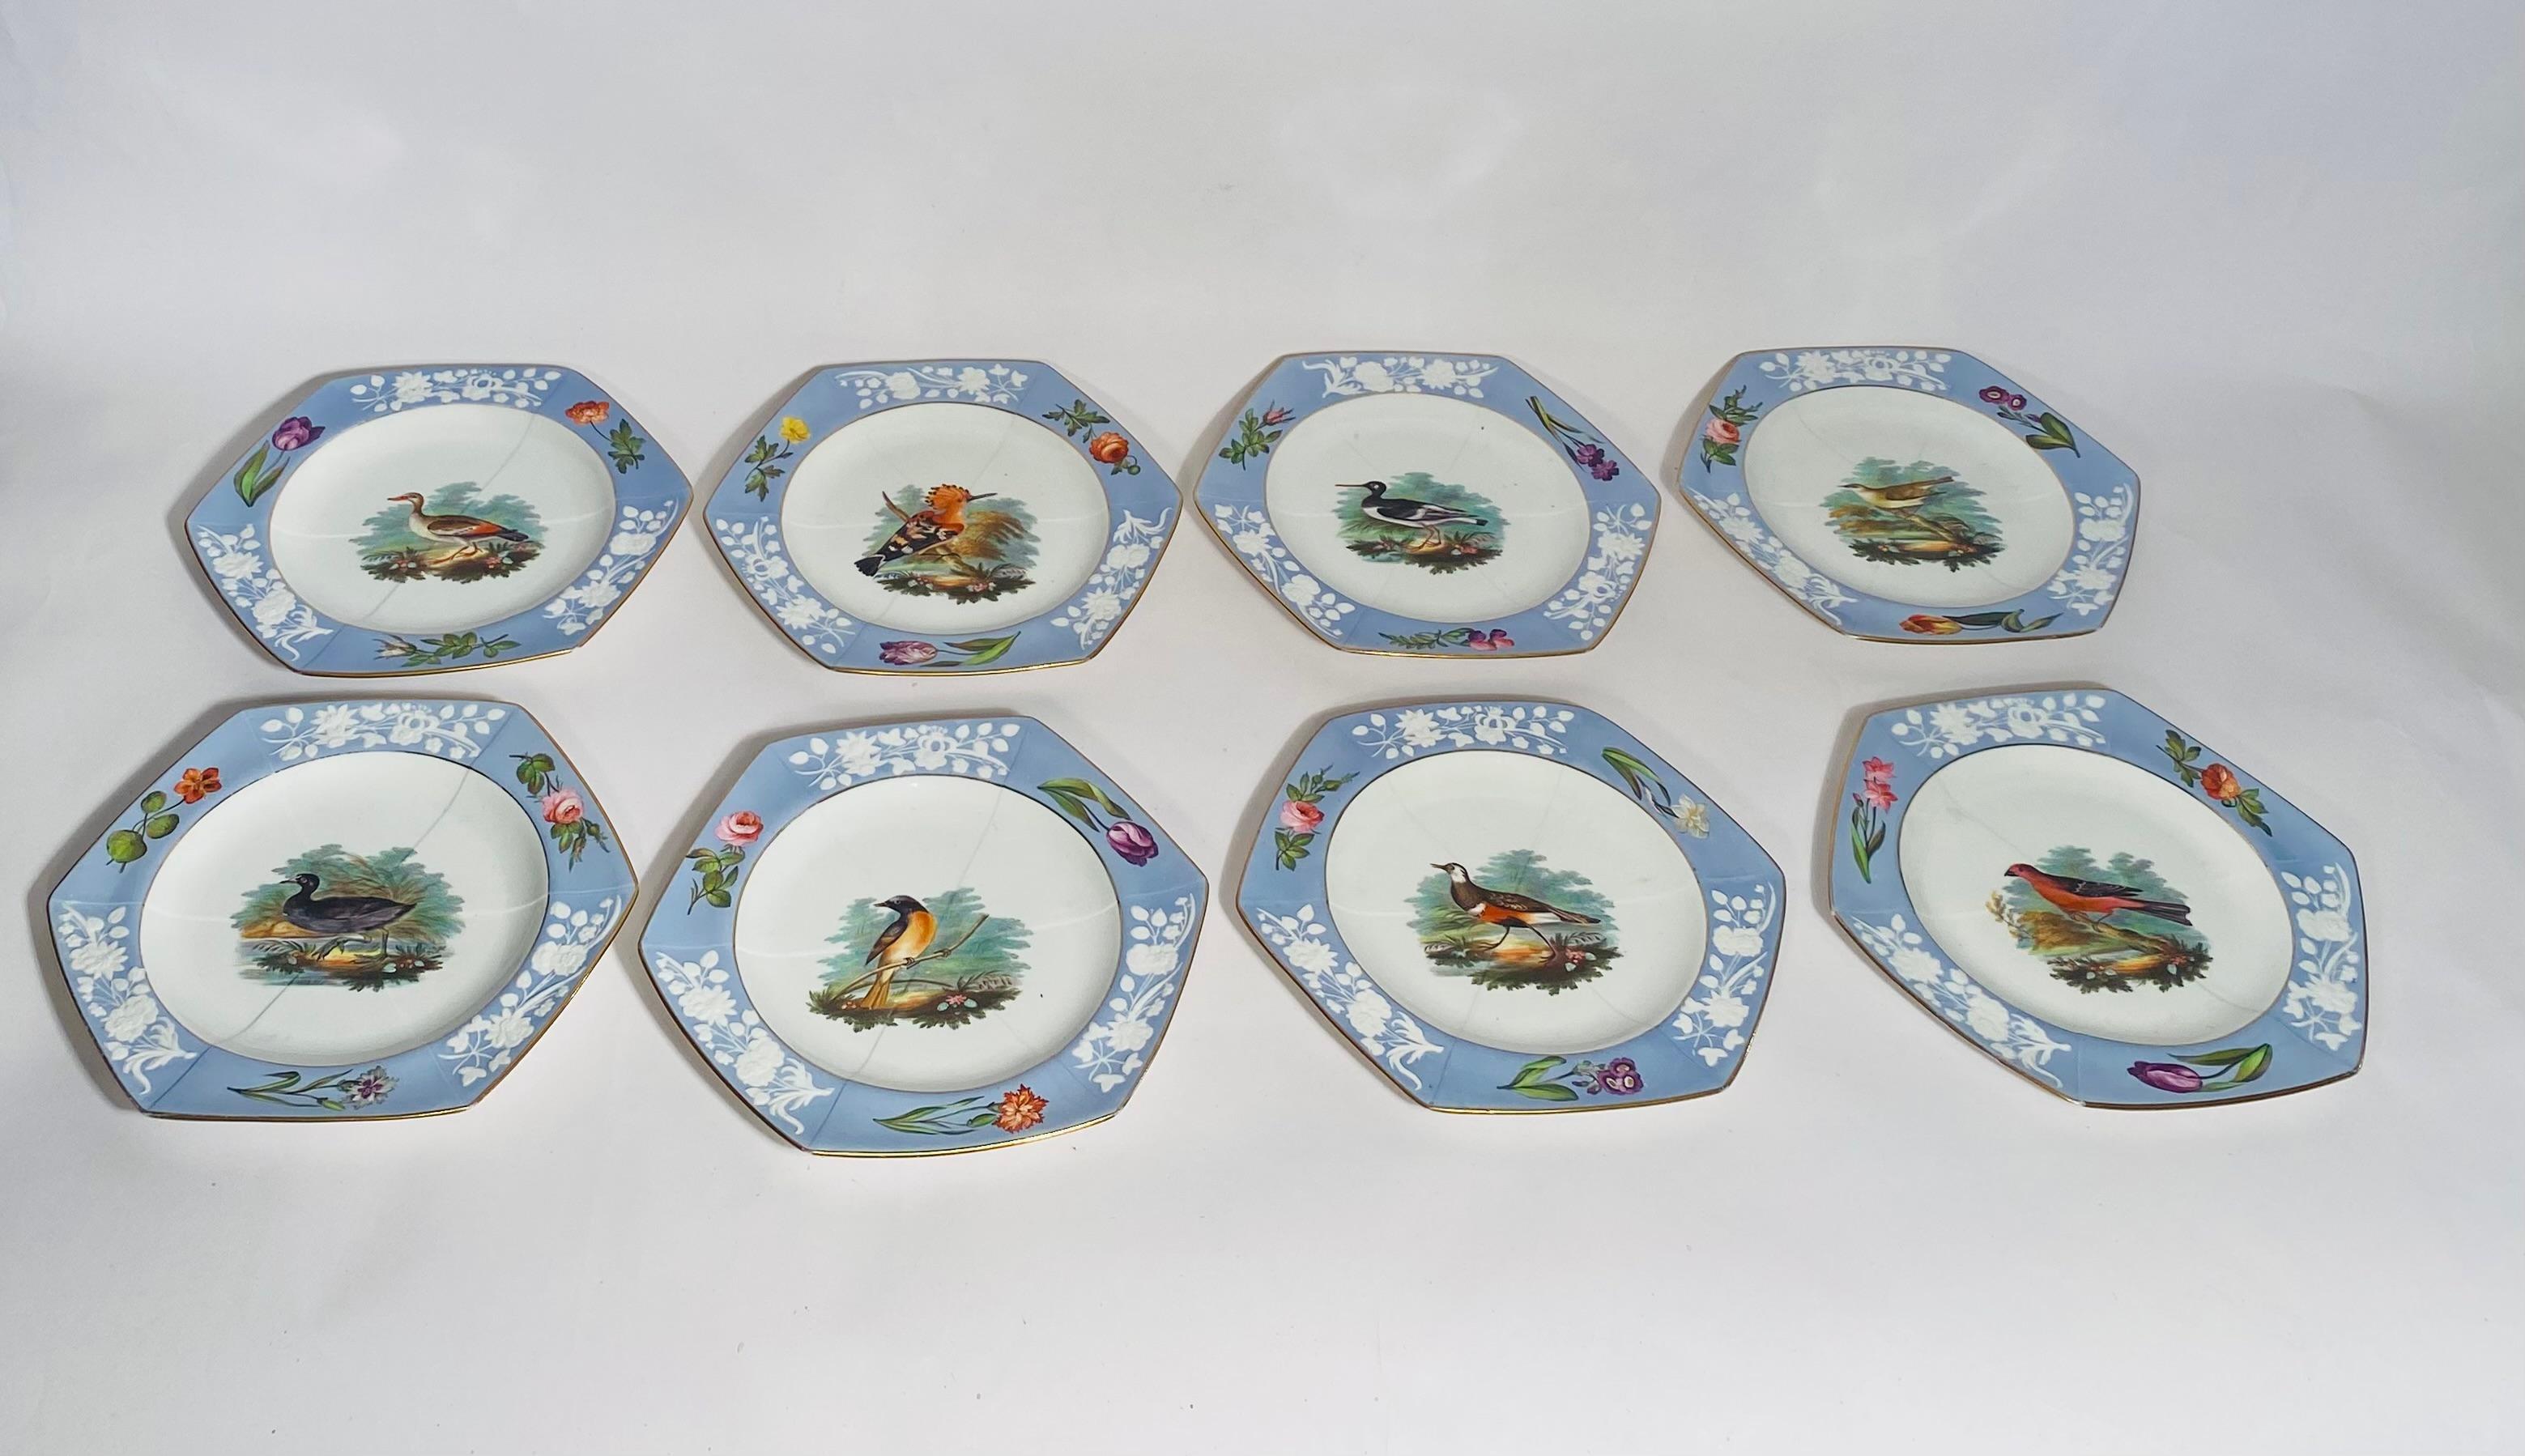 Antique English Periwinkle Blue Dessert Service for 16, Spode Circa 1820  In Good Condition For Sale In West Palm Beach, FL